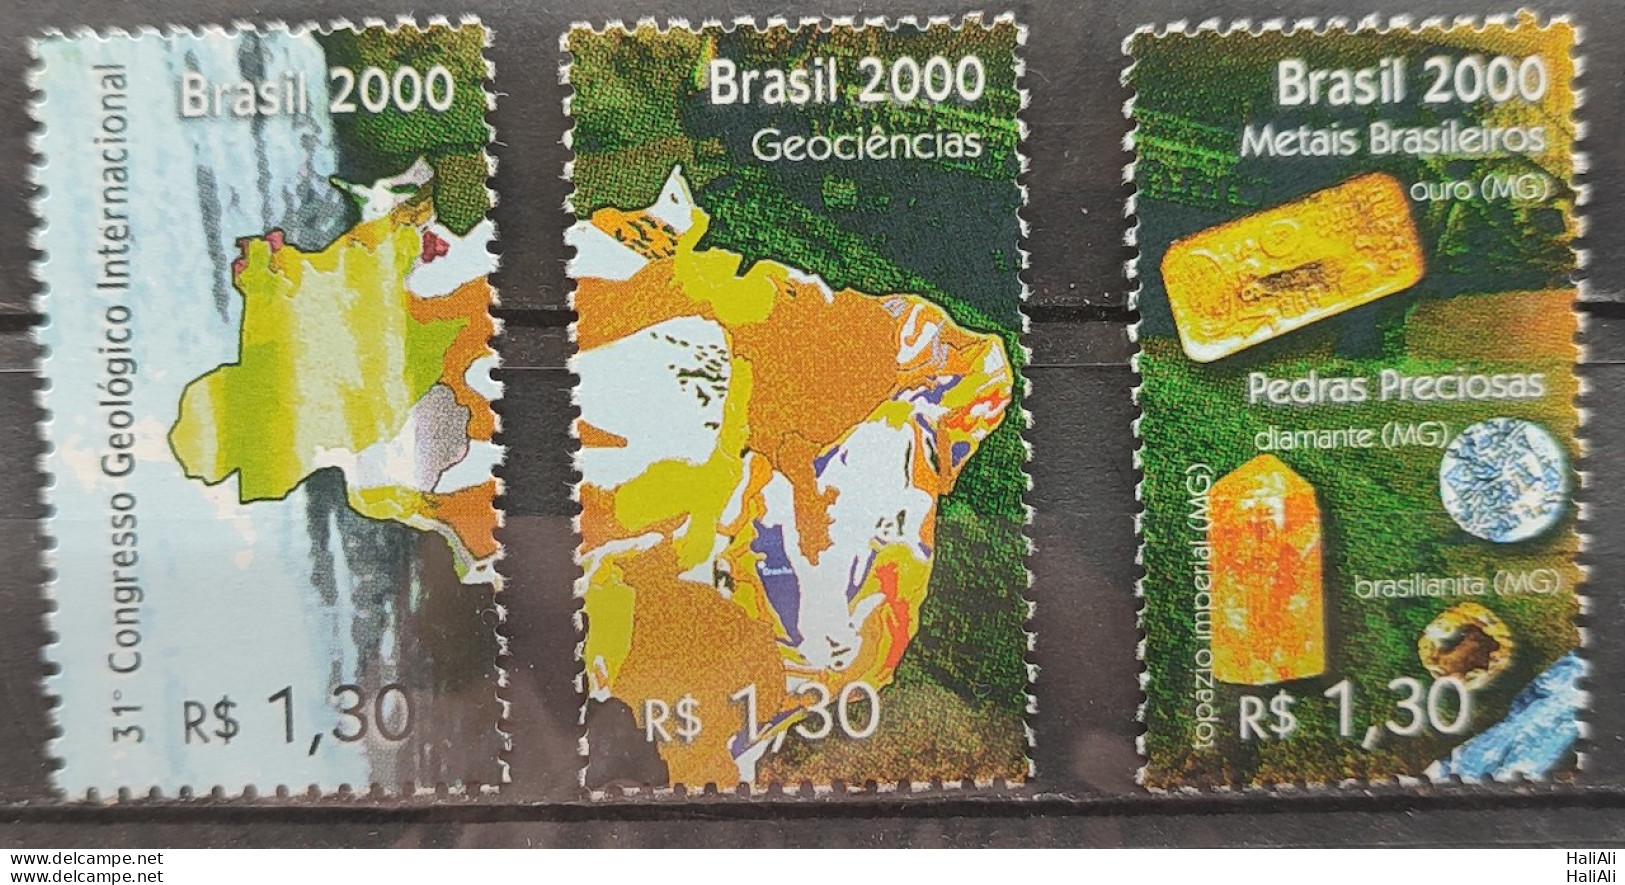 C 2277 Brazil Stamp From Brazil Stamp Geology Hannover Map Jewel Gold Diamond 2000 - Unused Stamps